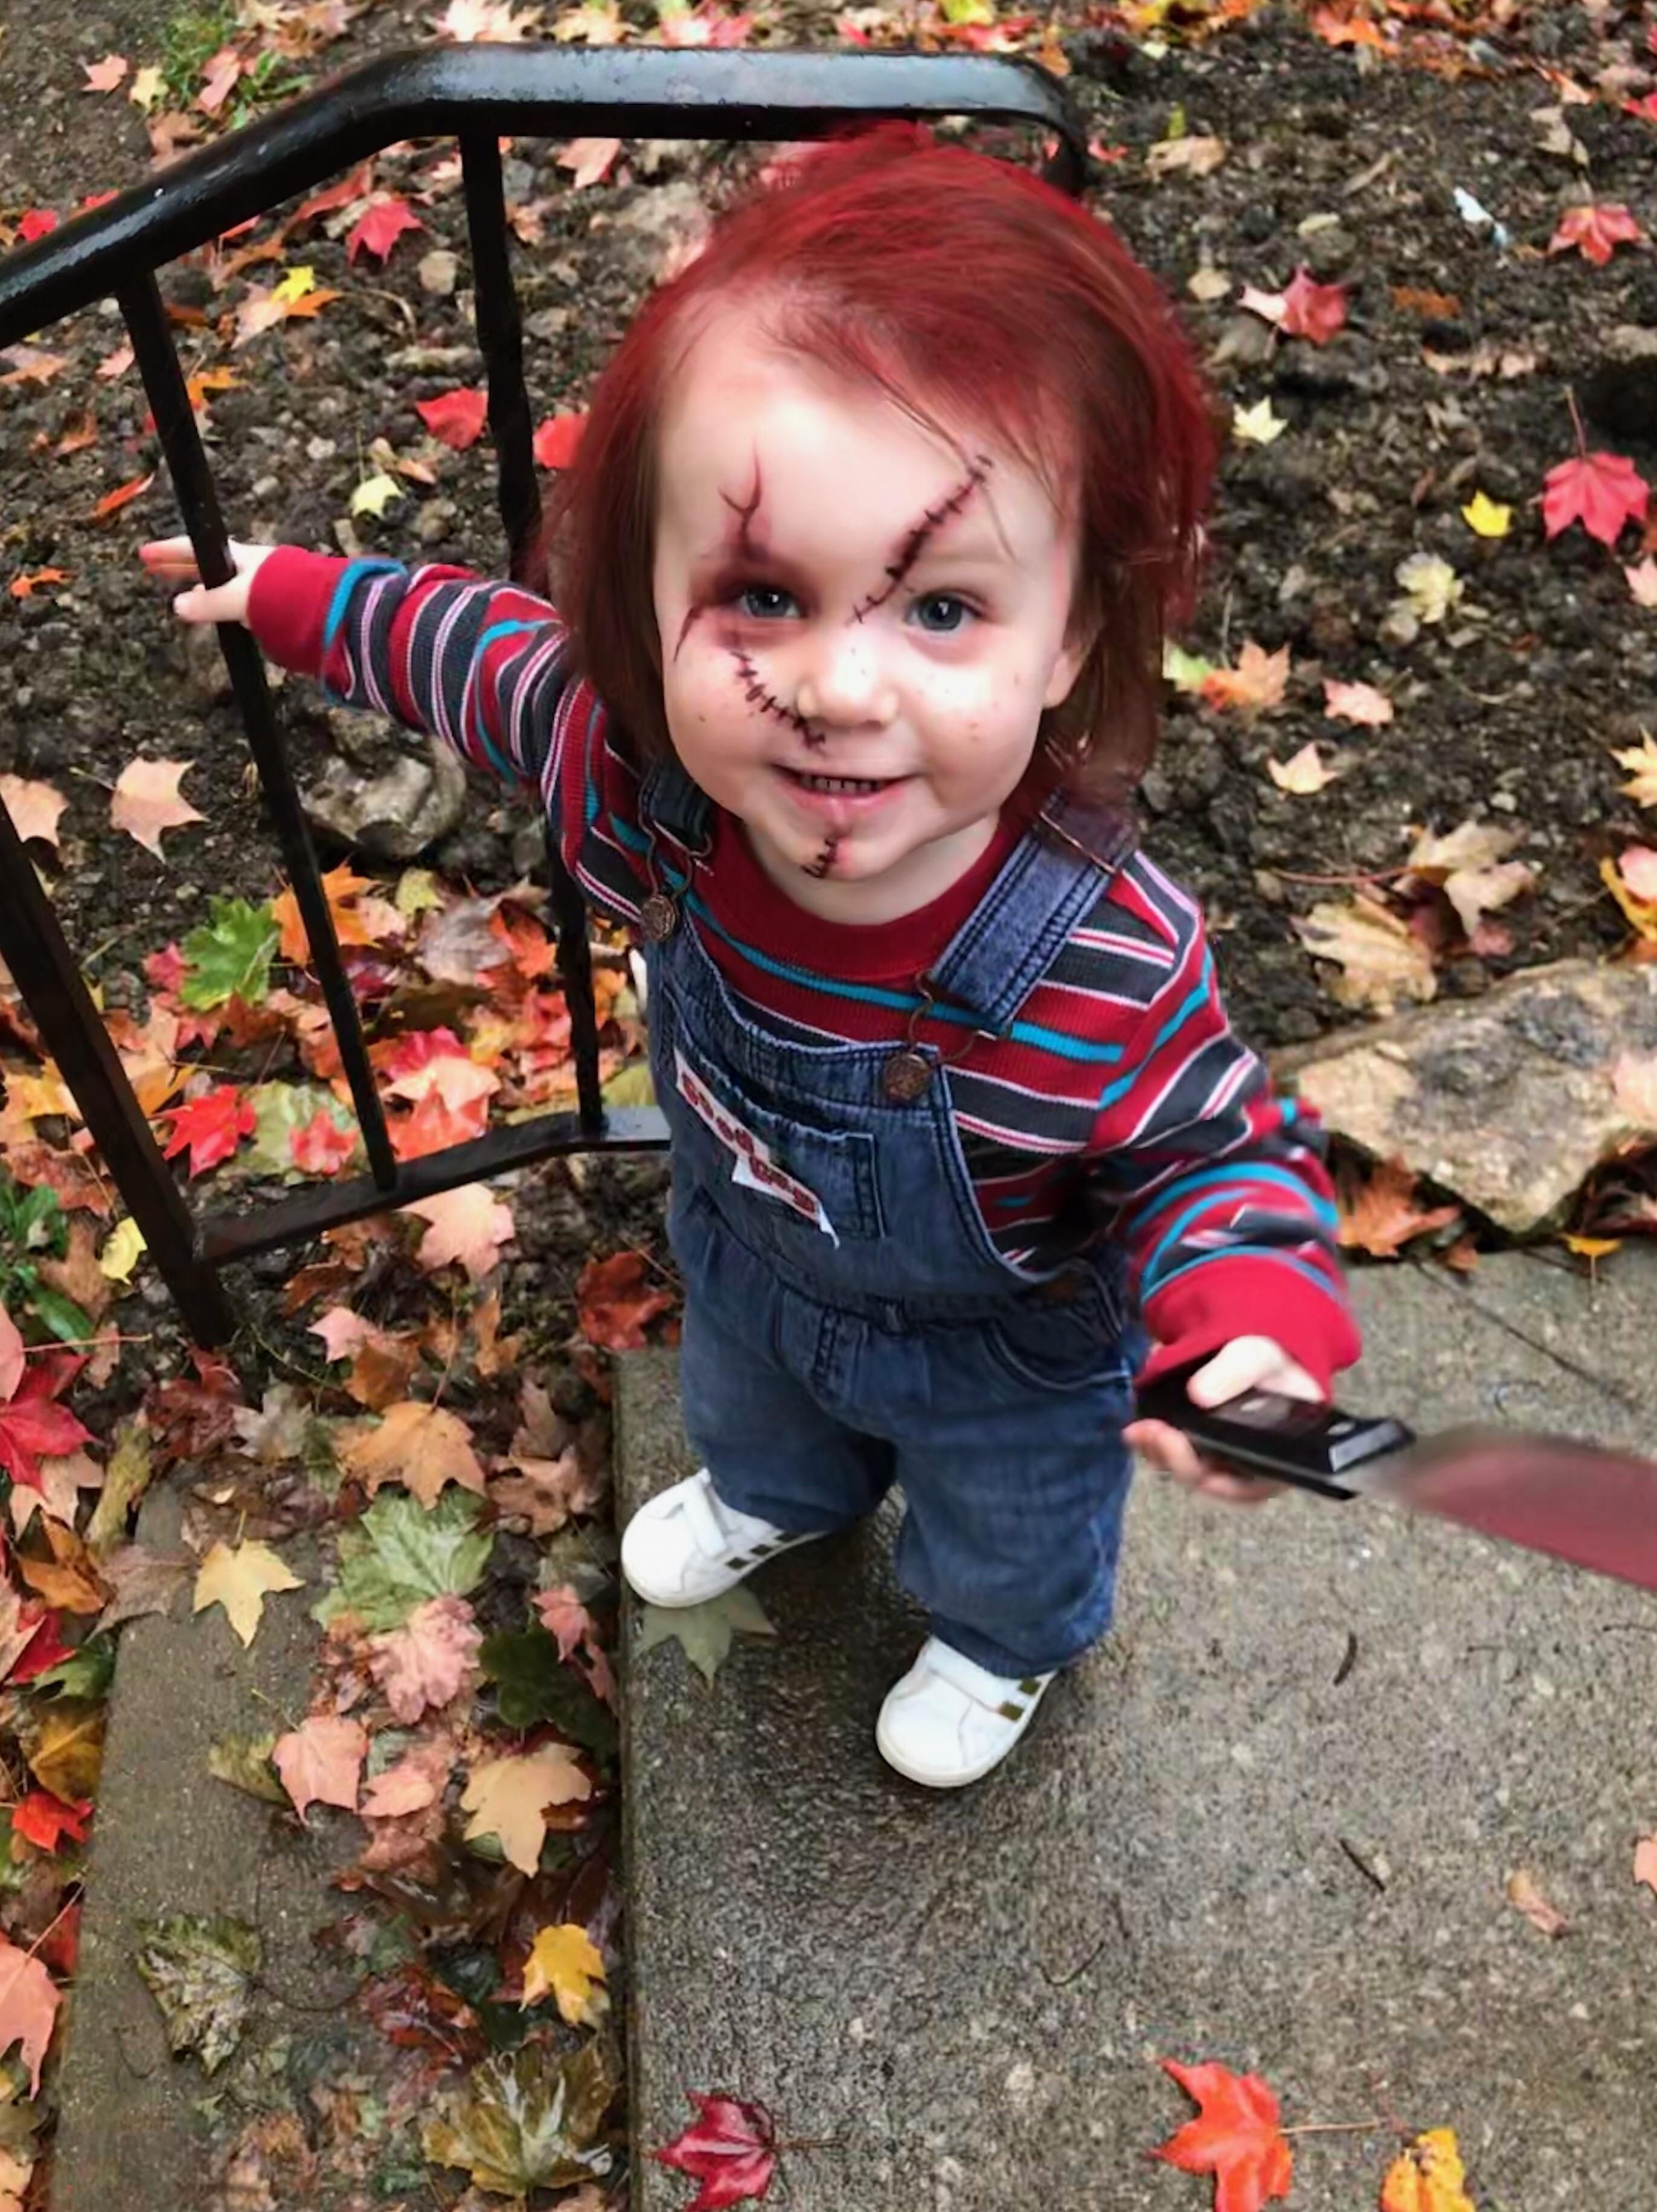 Our two year old daughter. Because when big sis wants to dress up as Jason Voorhees, what better side kick than Chucky?